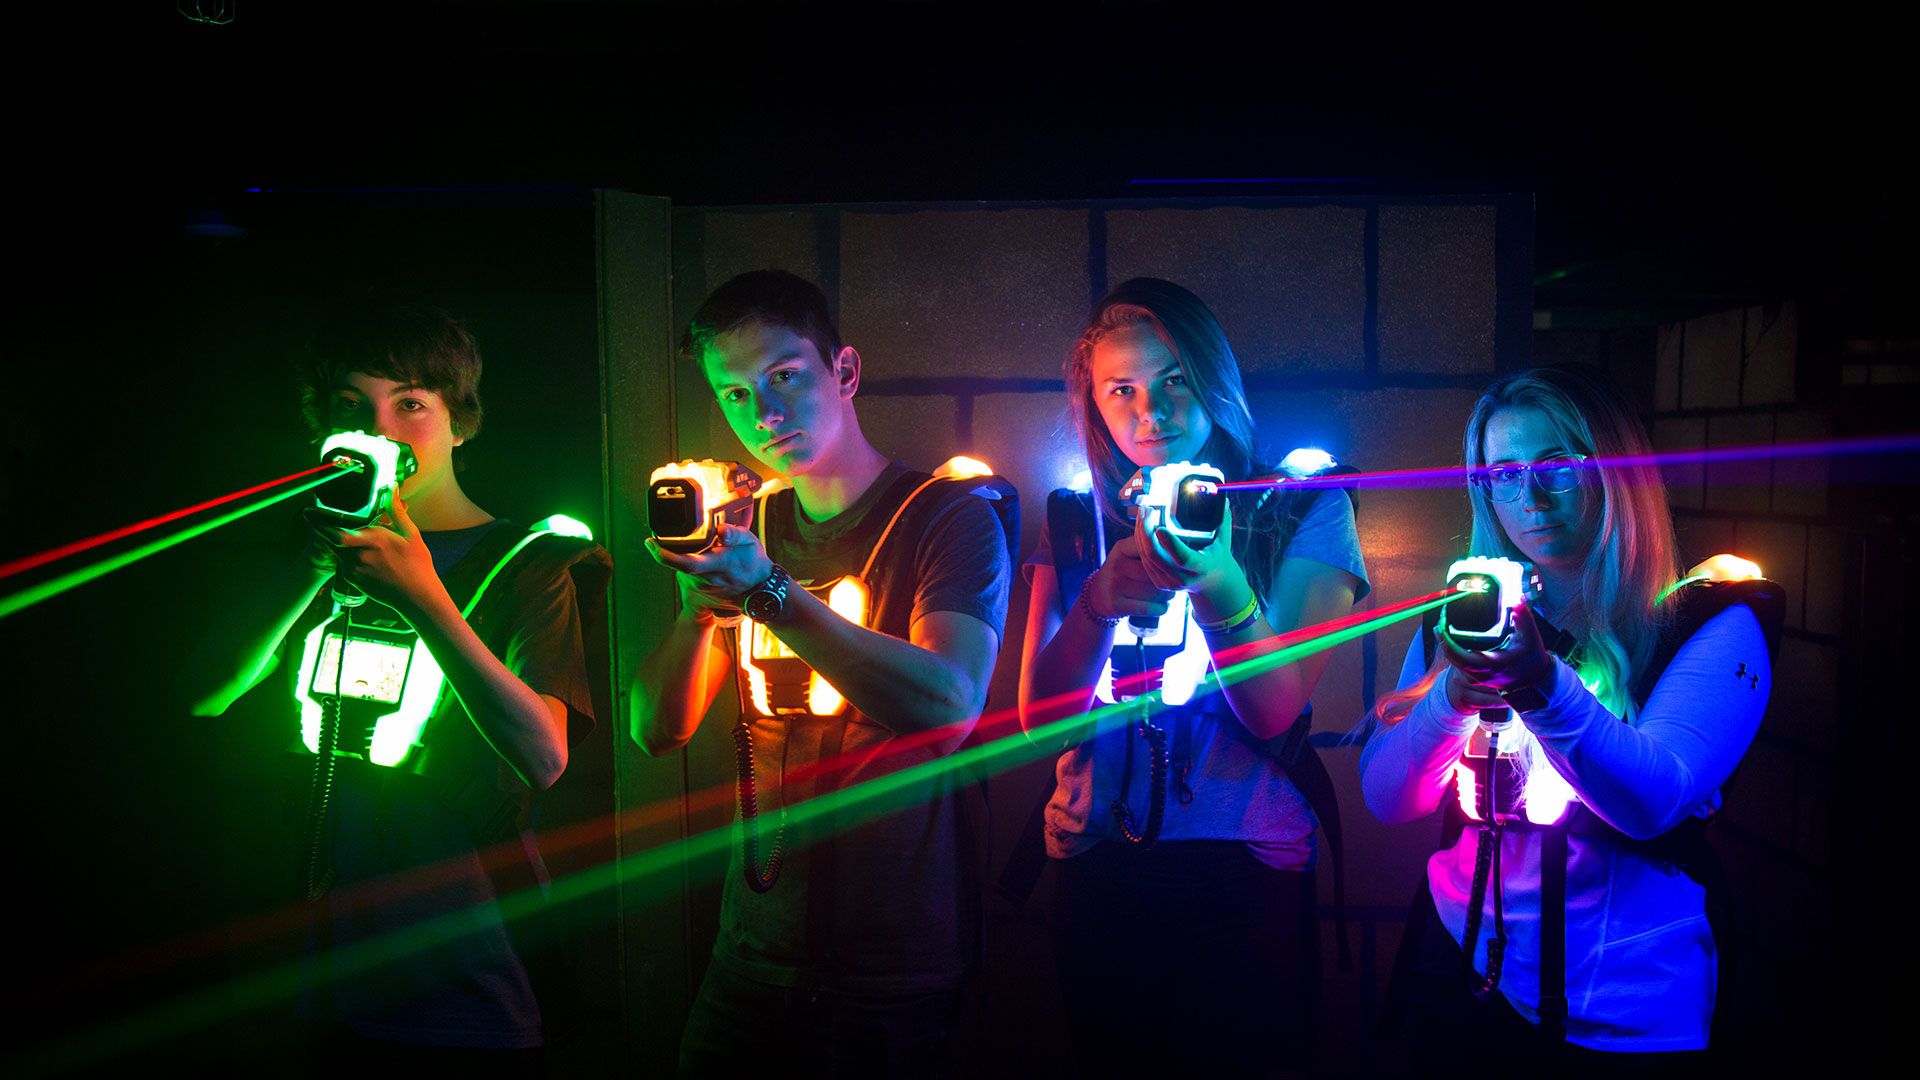 lasertag pistols and suits vests buy children adults